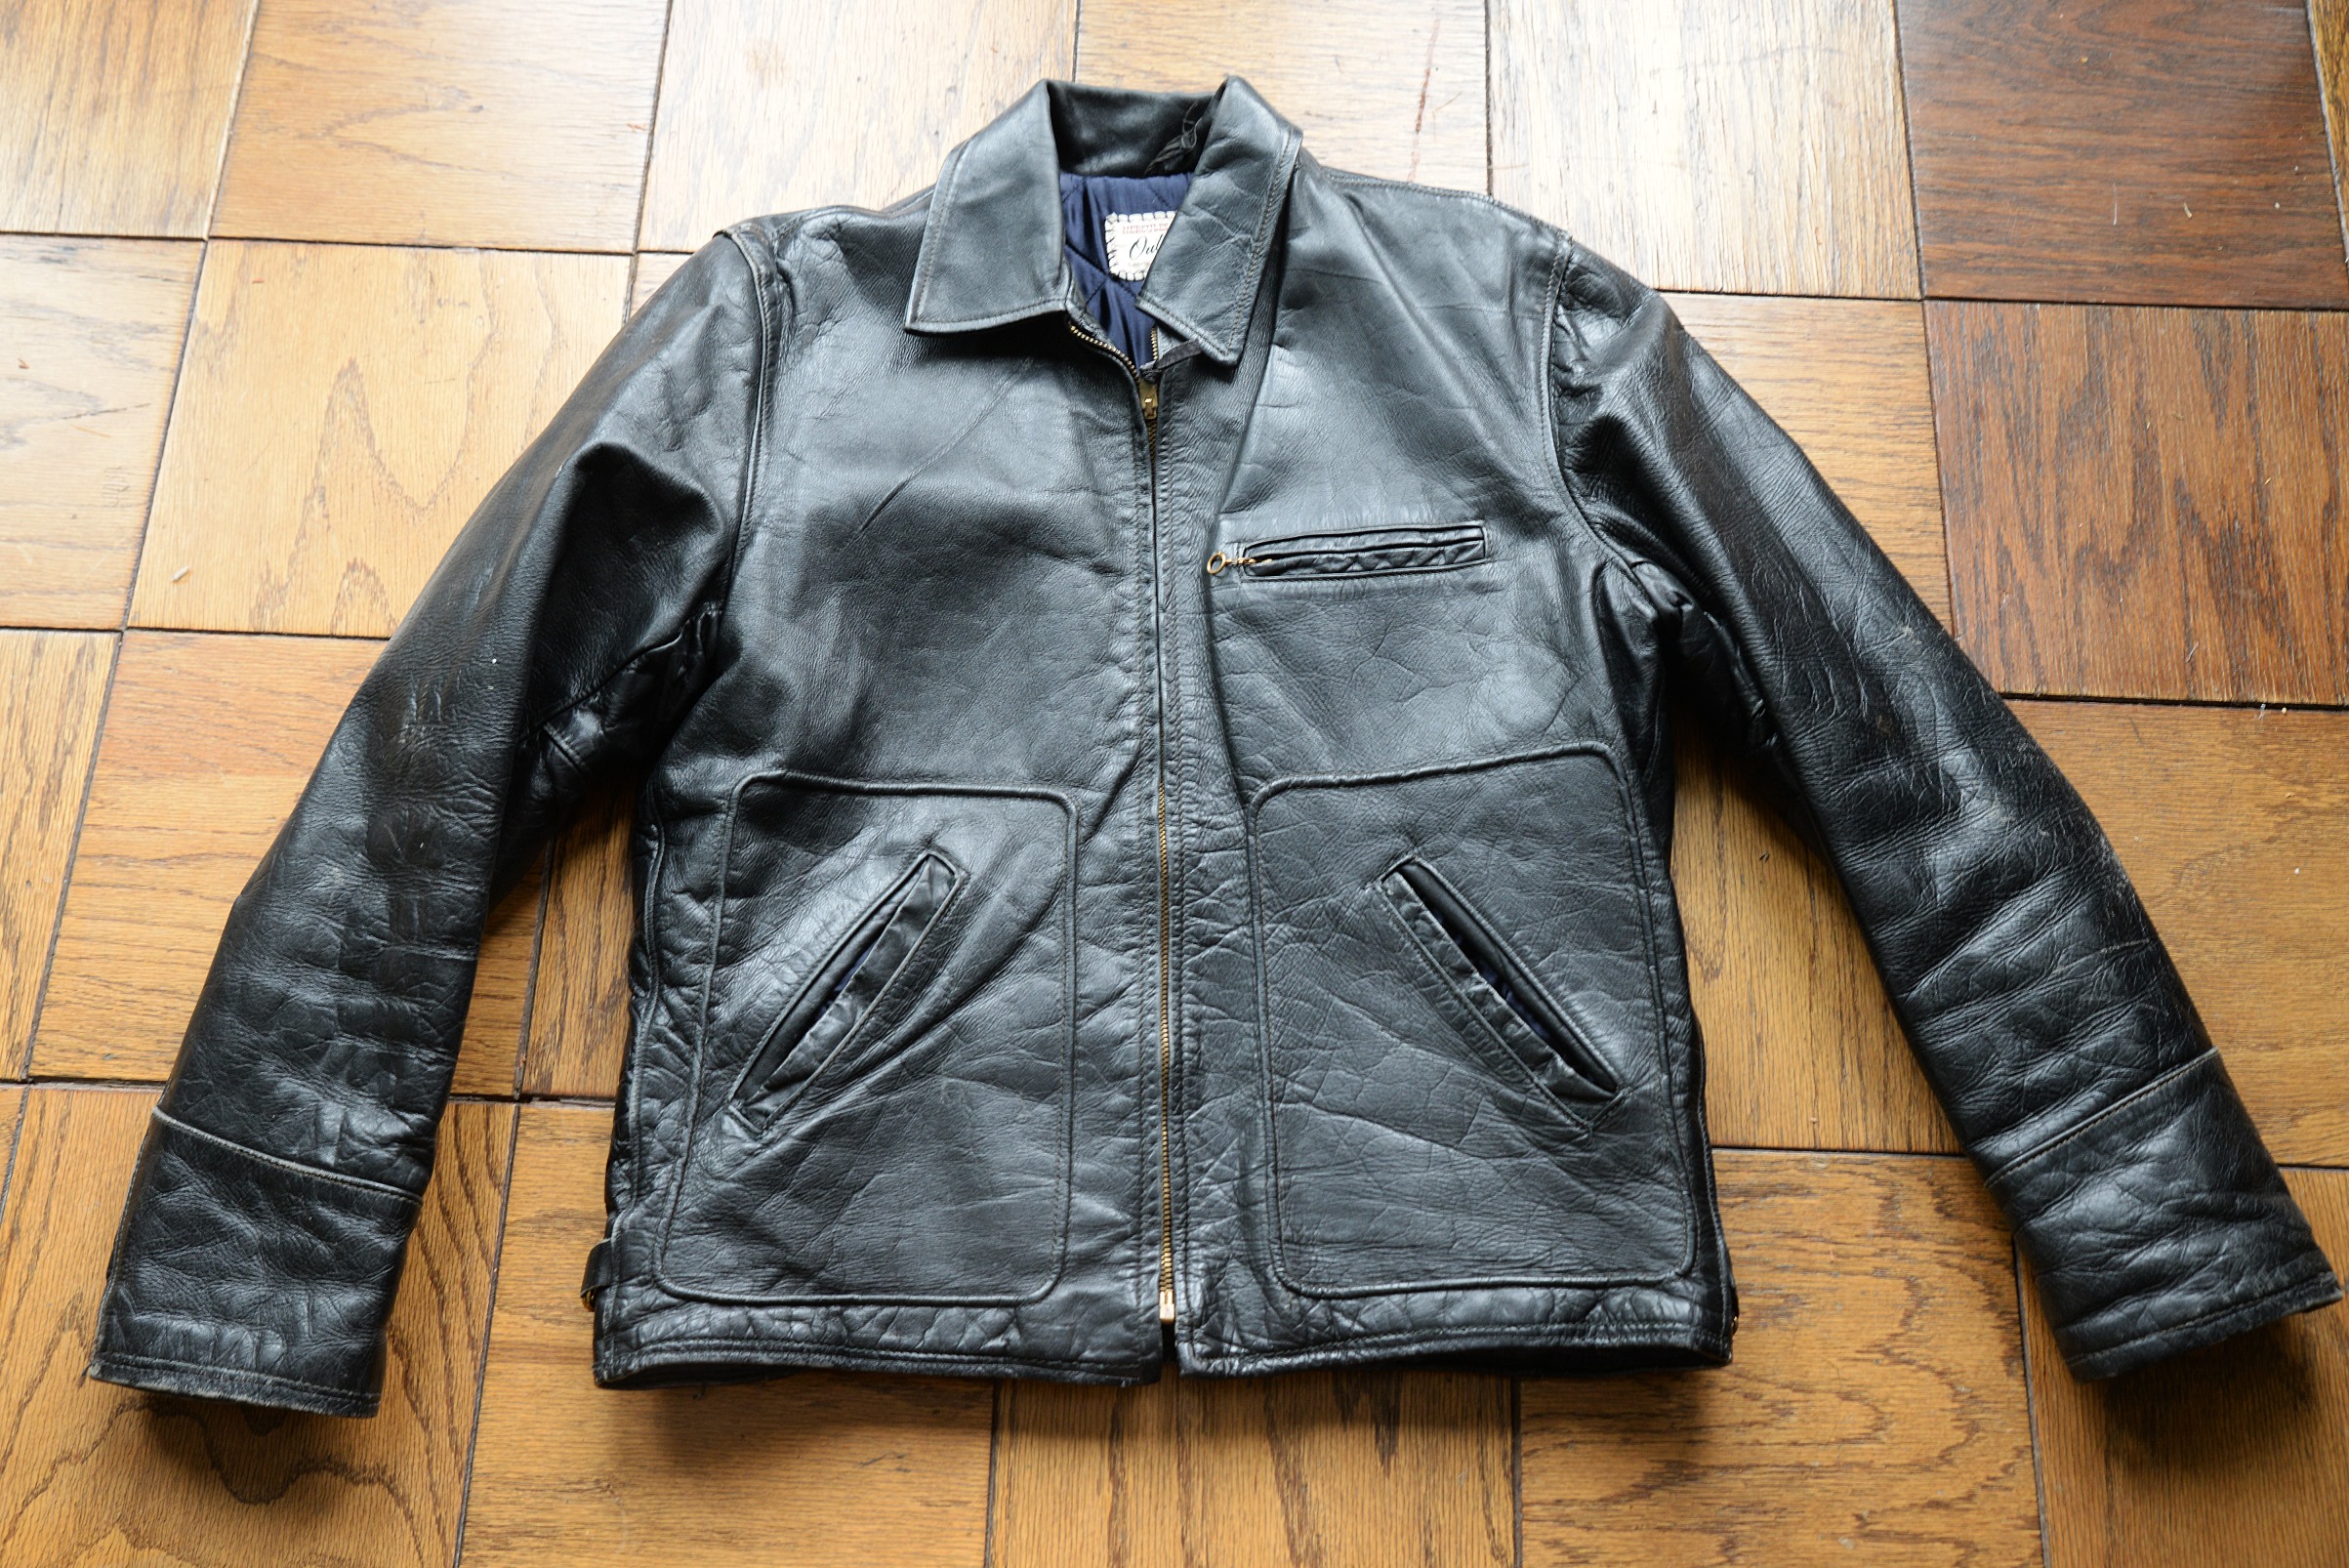 Authentic Indian Motorcycles Jacket? | Vintage Leather Jackets Forum